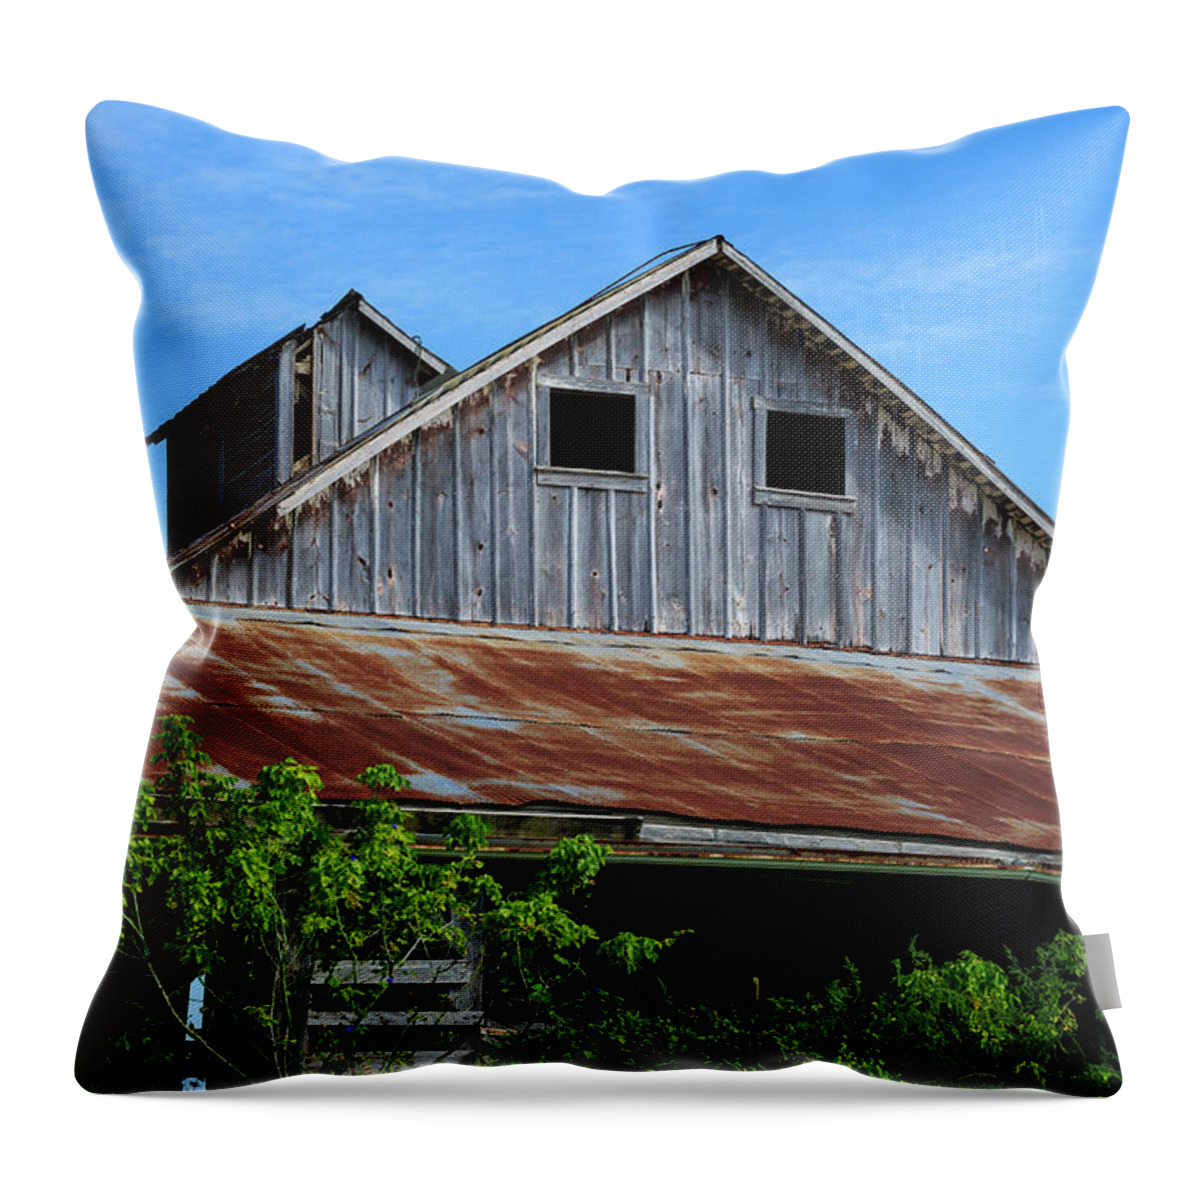 Barn Throw Pillow featuring the photograph The Old Rusty Barn by Terri Morris